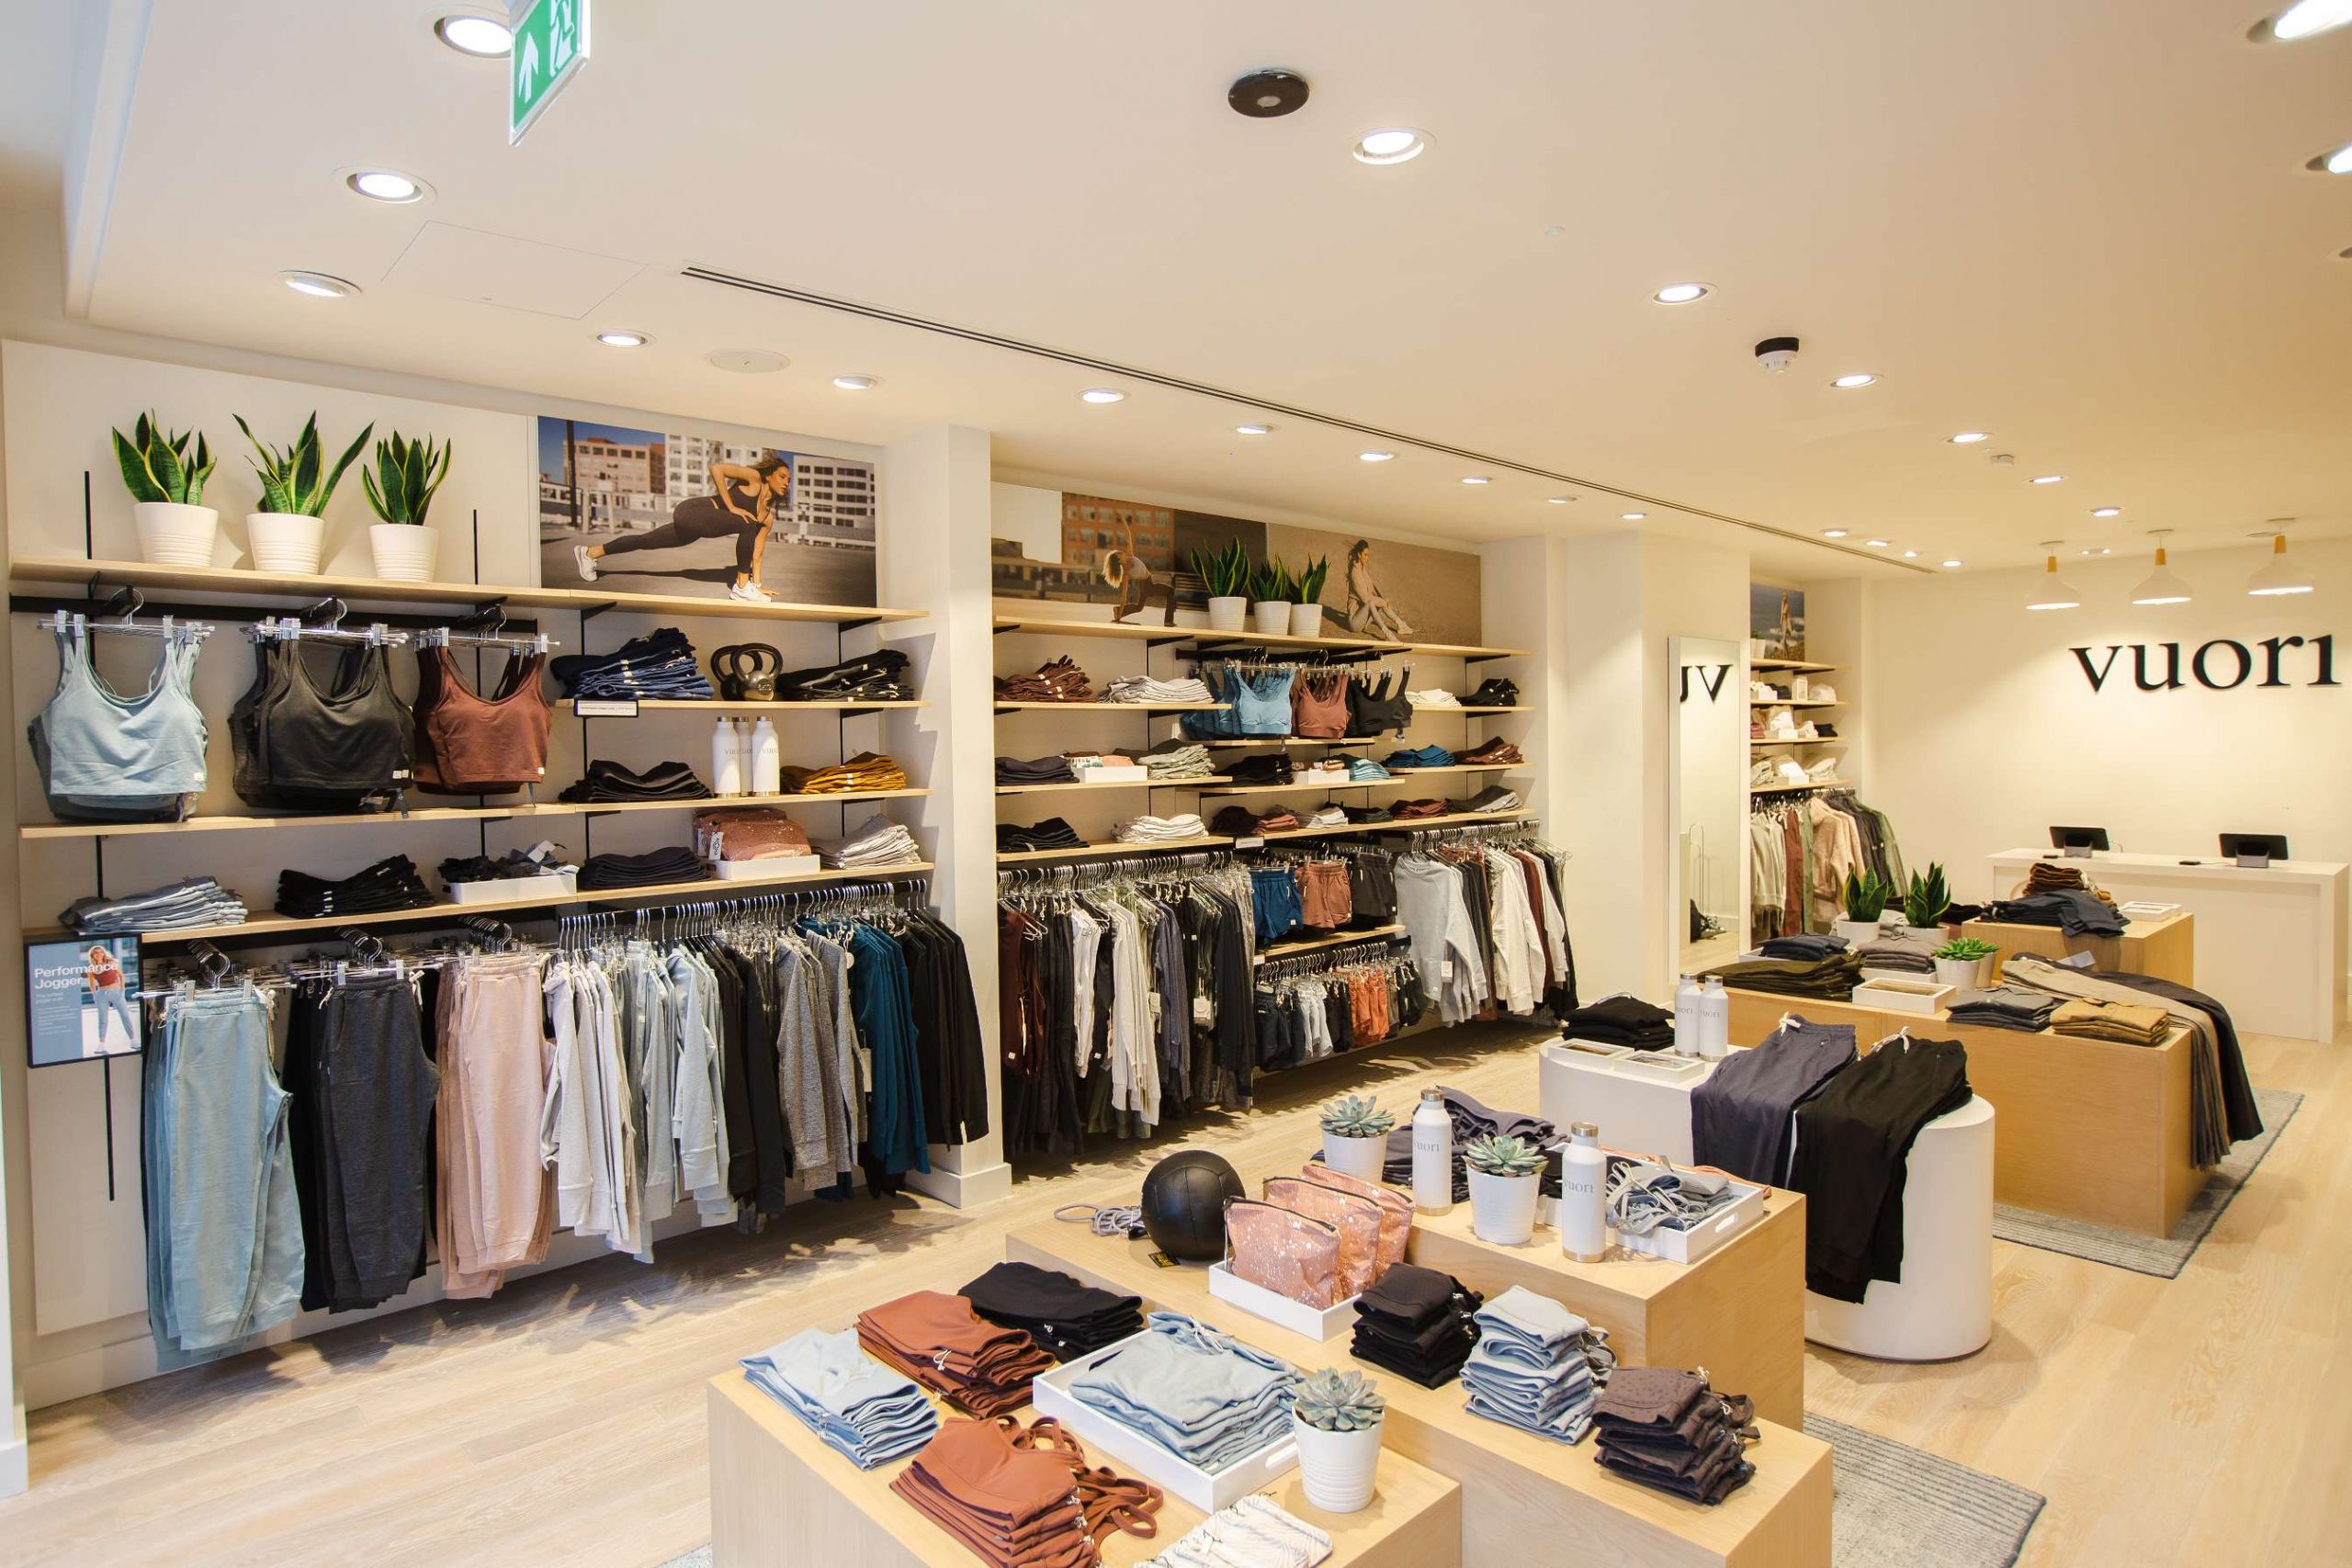 Vuori, the California-based clothing brand, opens the doors to its first UK  store in London's Covent Garden - Retail Focus - Retail Design